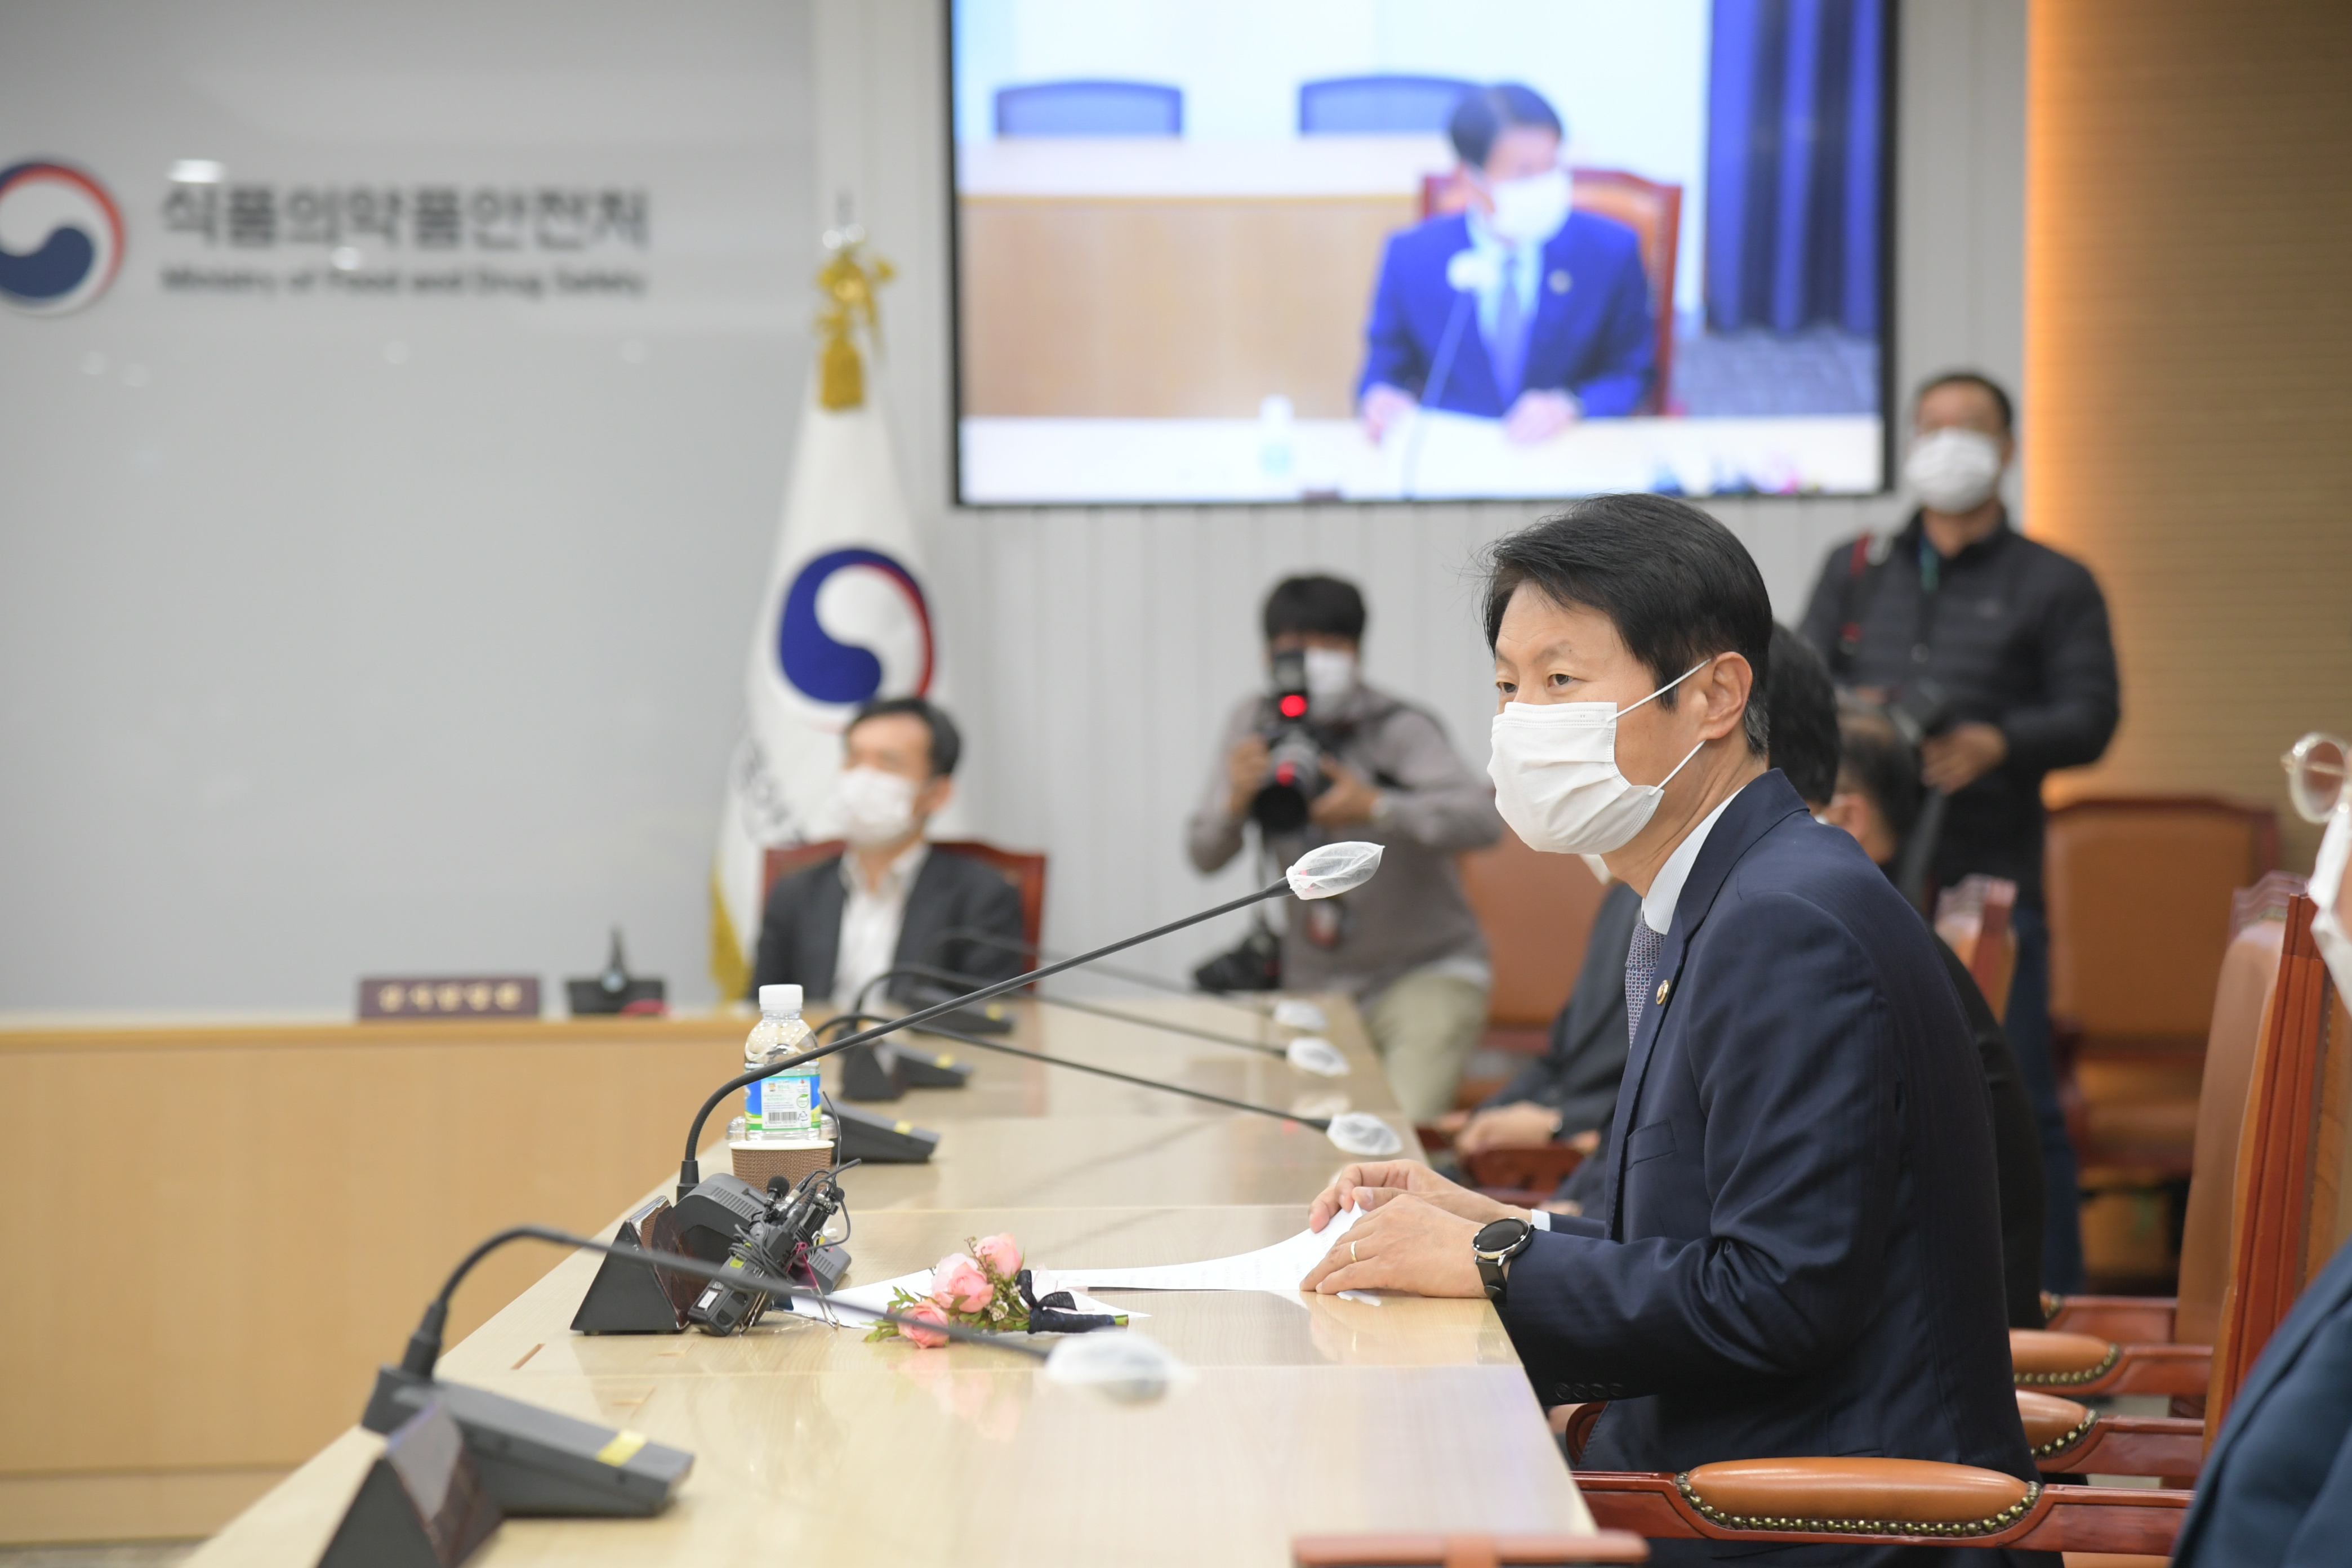 Photo News5 - [Nov. 2, 2020] Inauguration of Minister Kim Ganglip as the 6th Minister of Food and Drug Safety